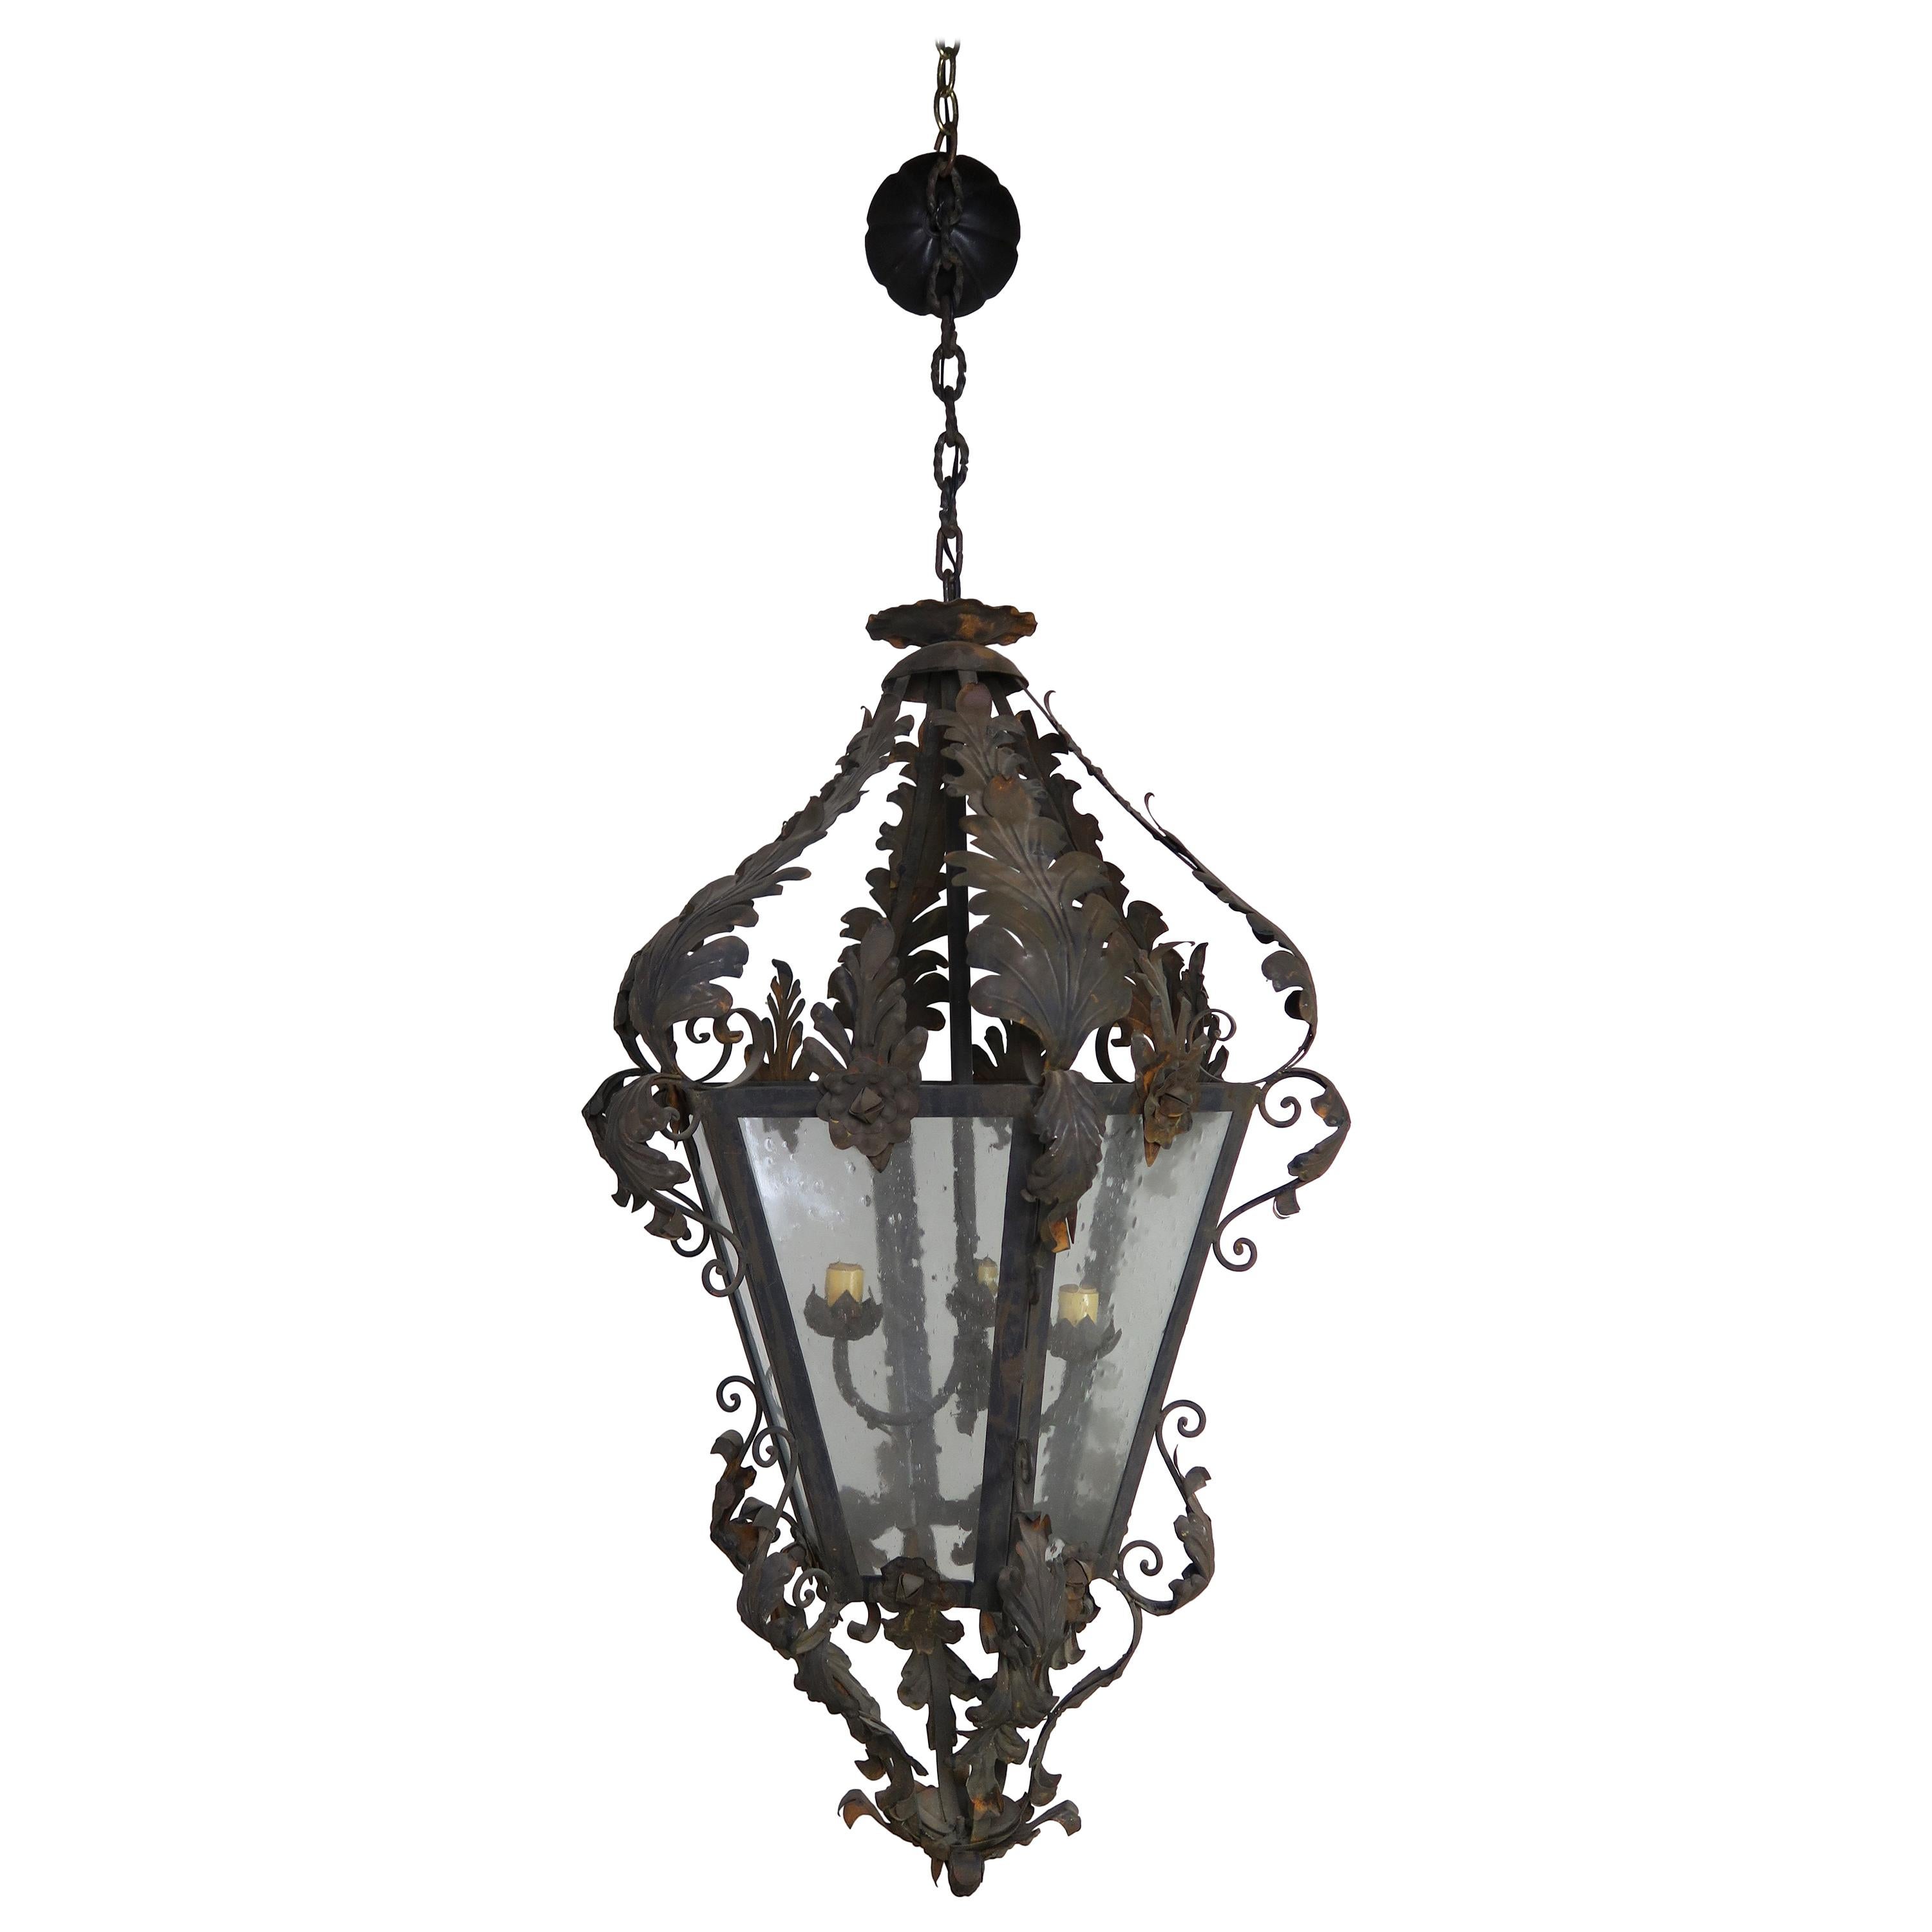 Spanish Wrought Iron and Reeded Glass Lantern, circa 1930s For Sale